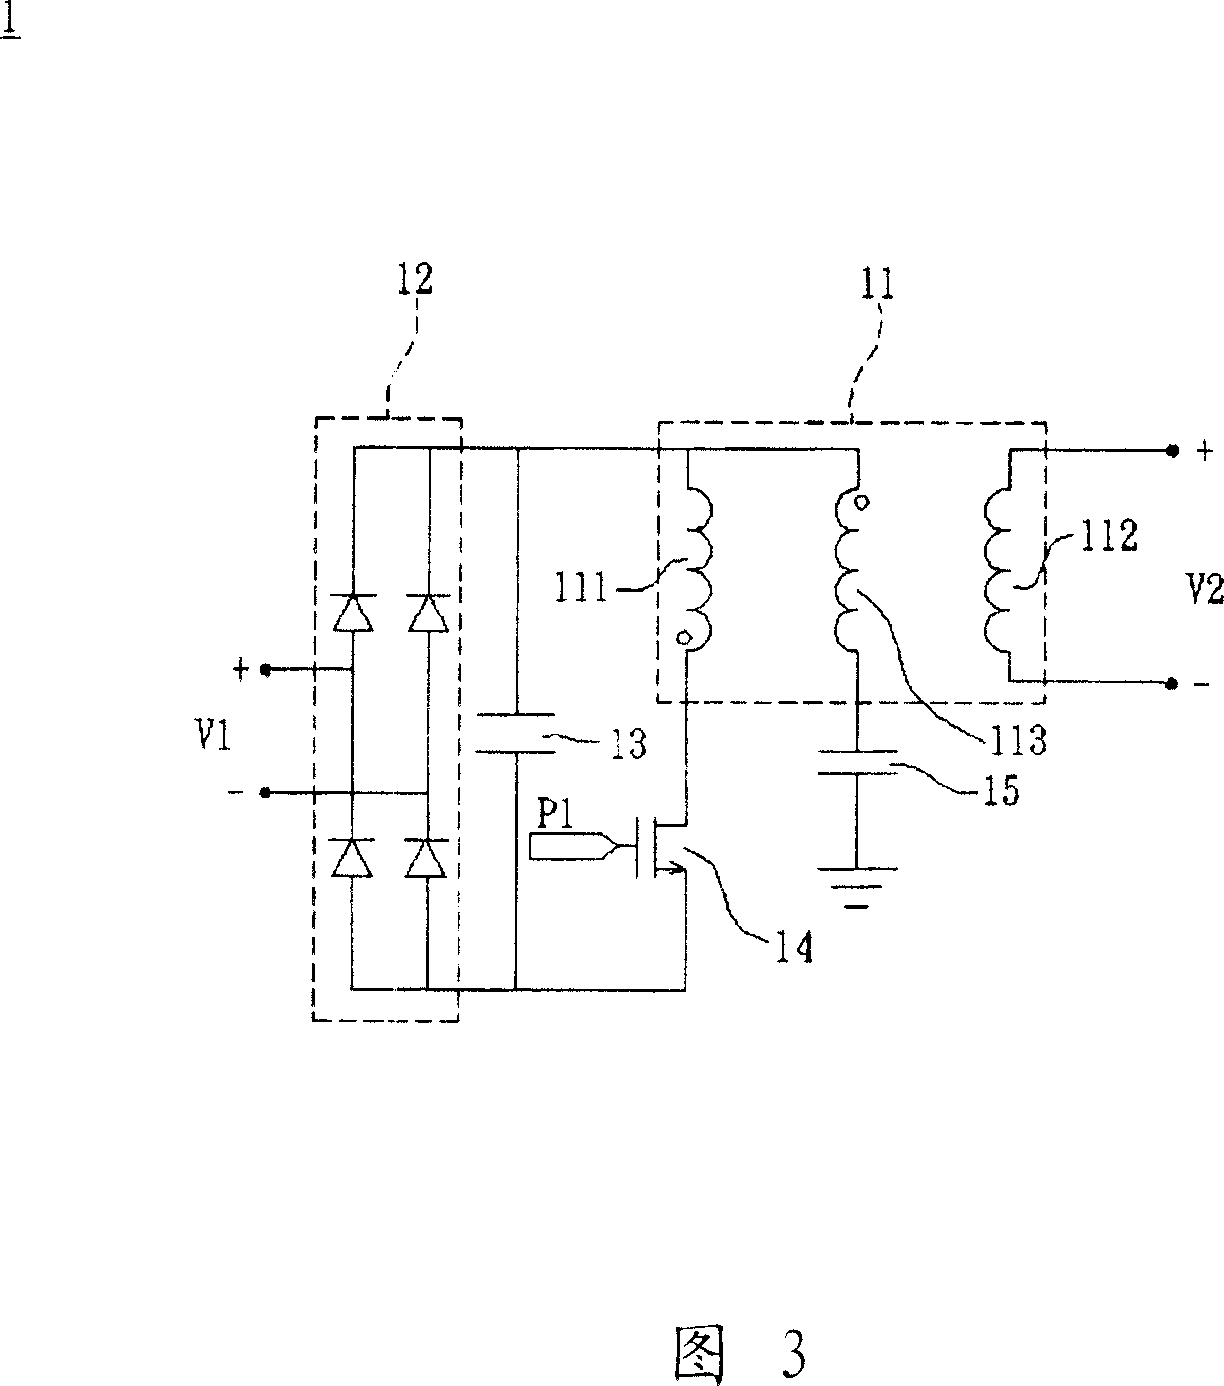 Power source converter and transformer